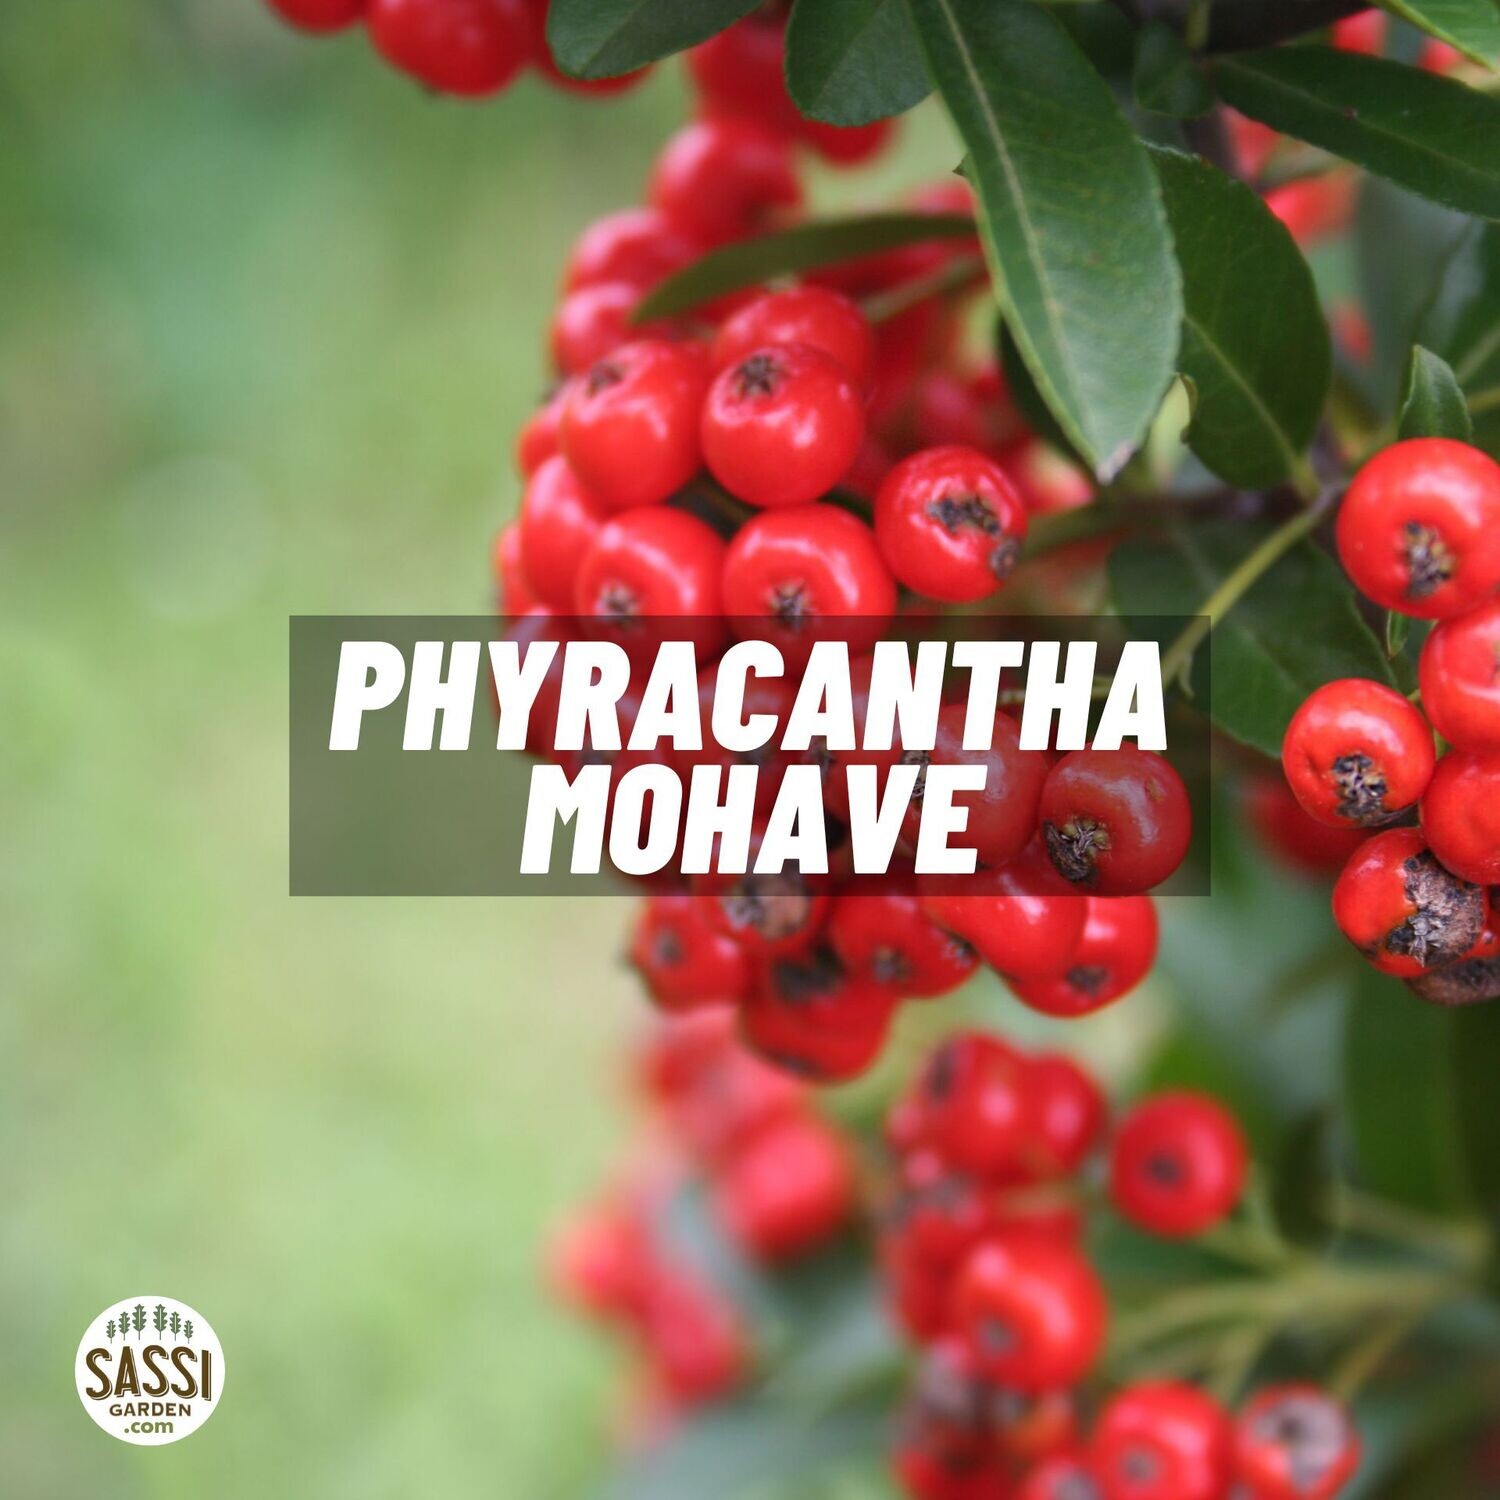 Phiracantha Mohave Pyracantha Pyracantha bacca rossa v24 h 140